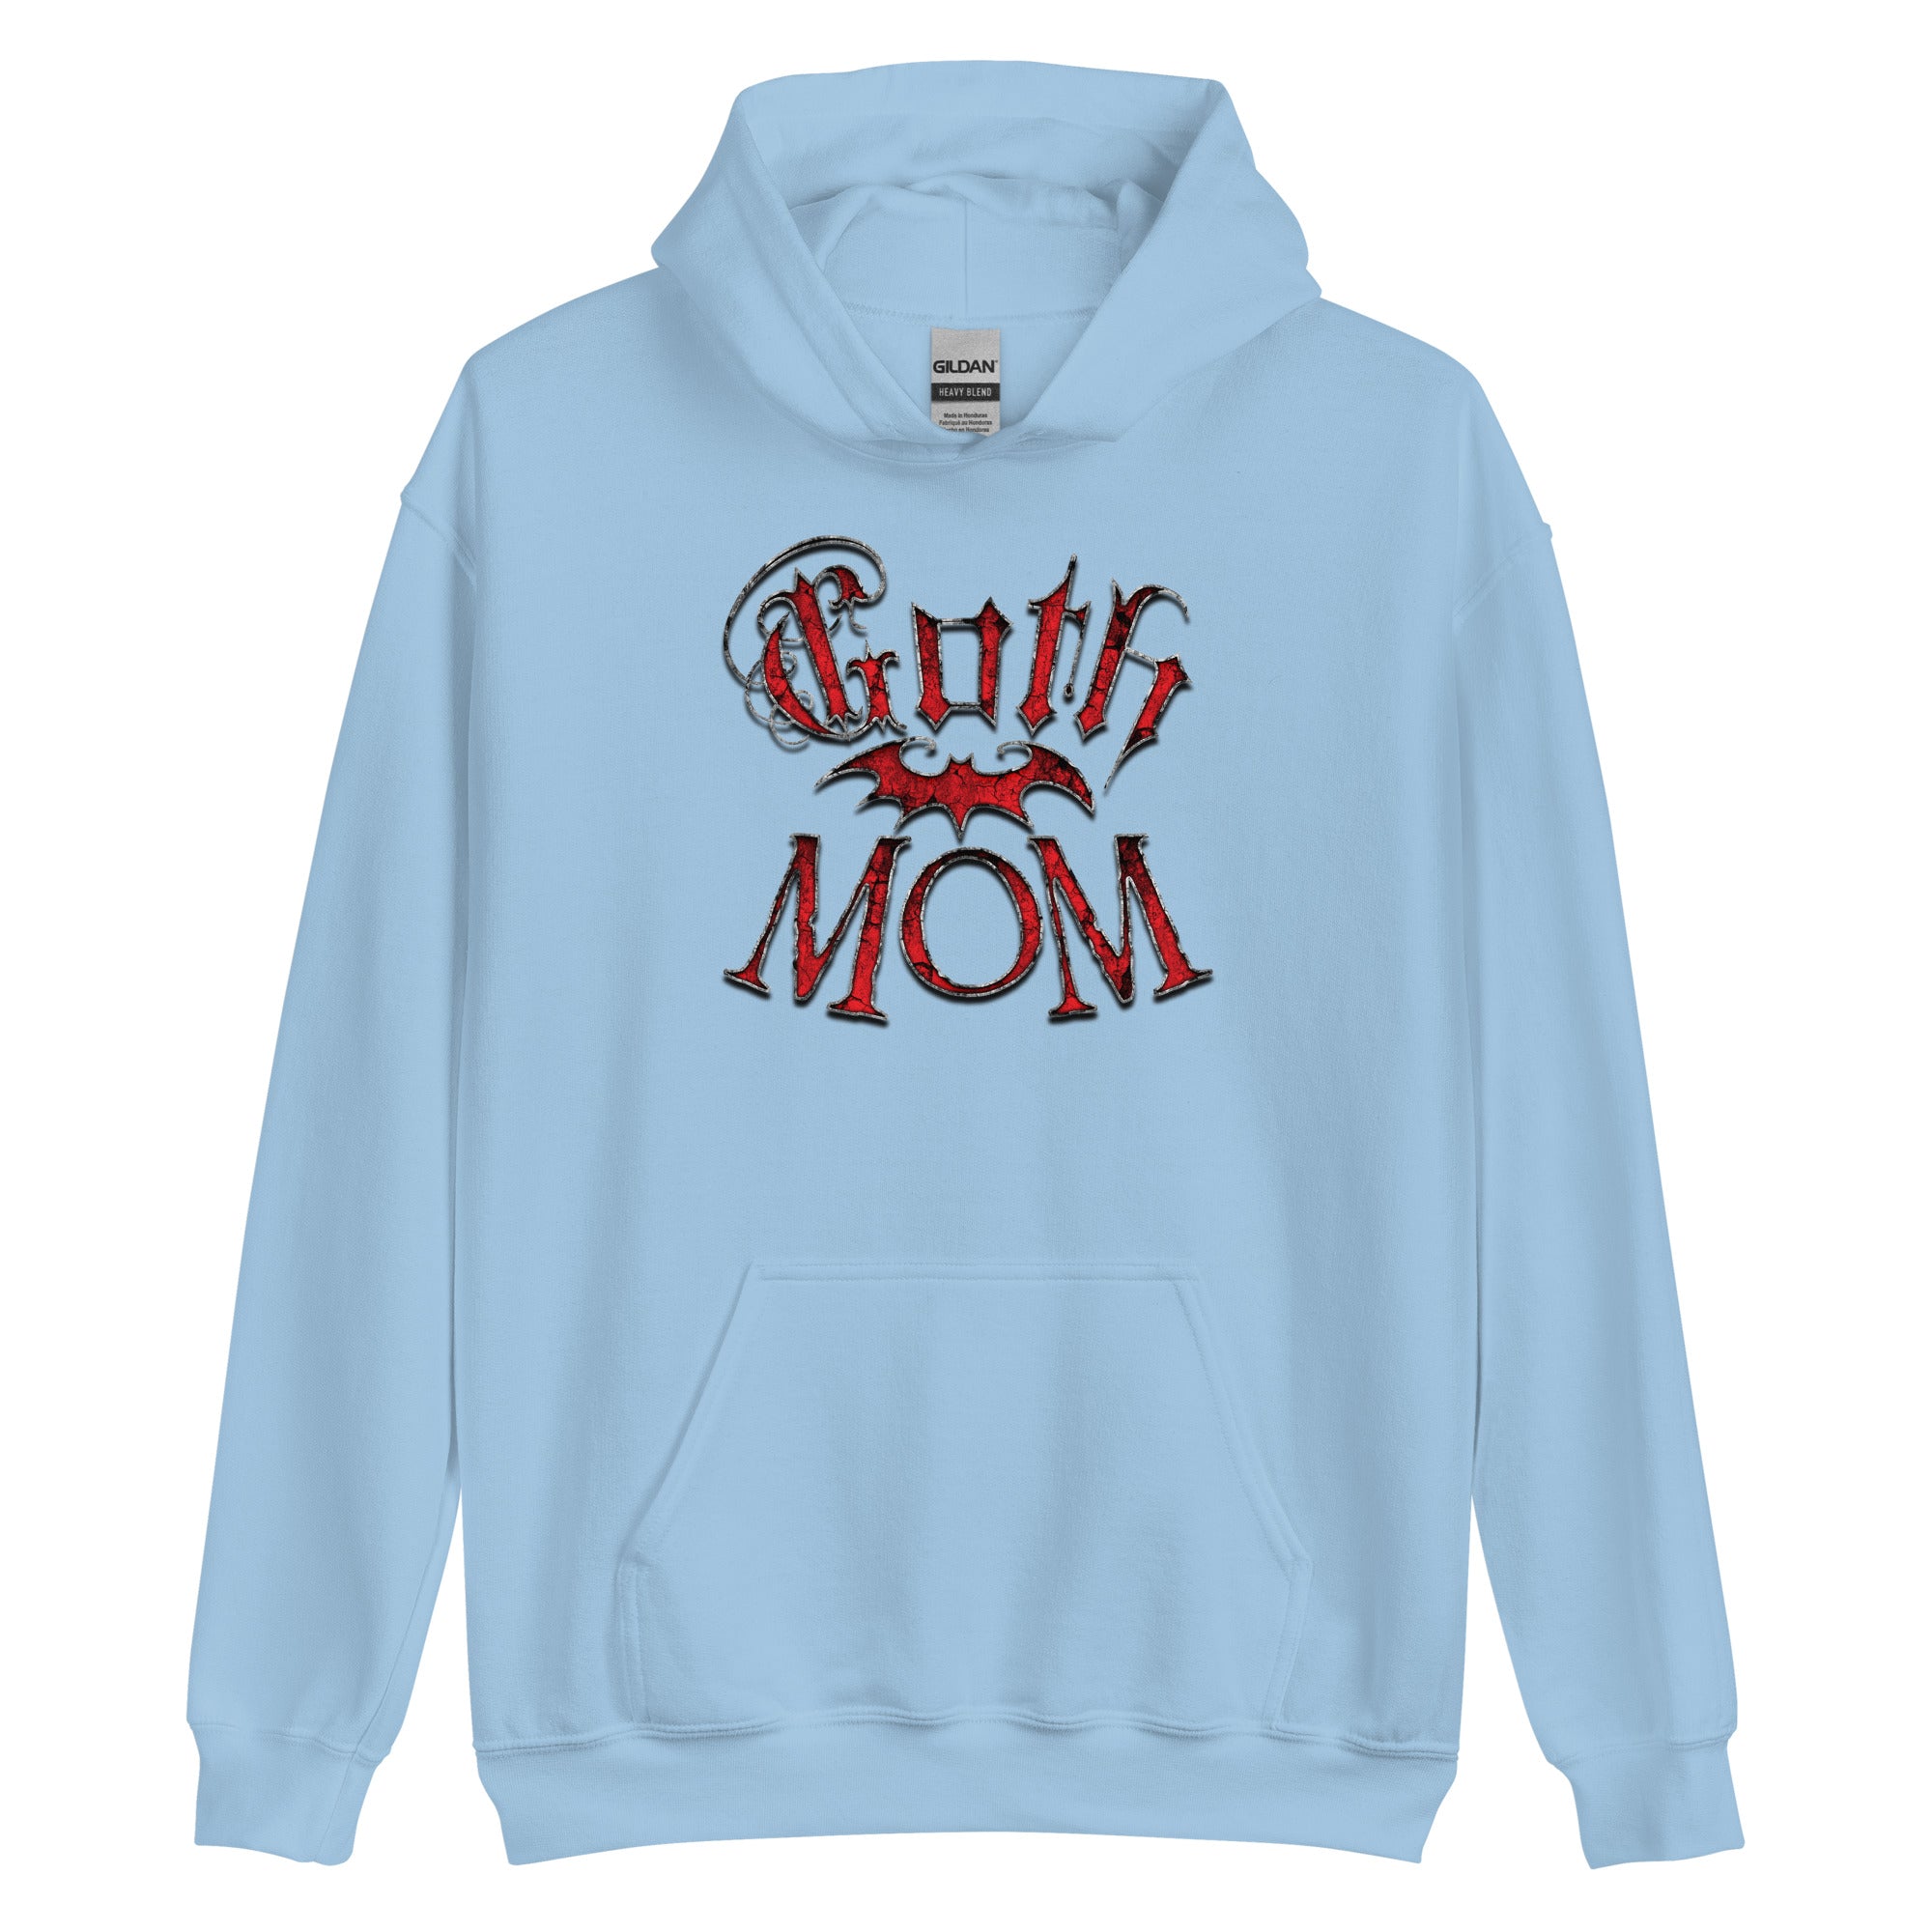 Red Goth Mom with Bat Mother's Day Unisex Hoodie Sweatshirt